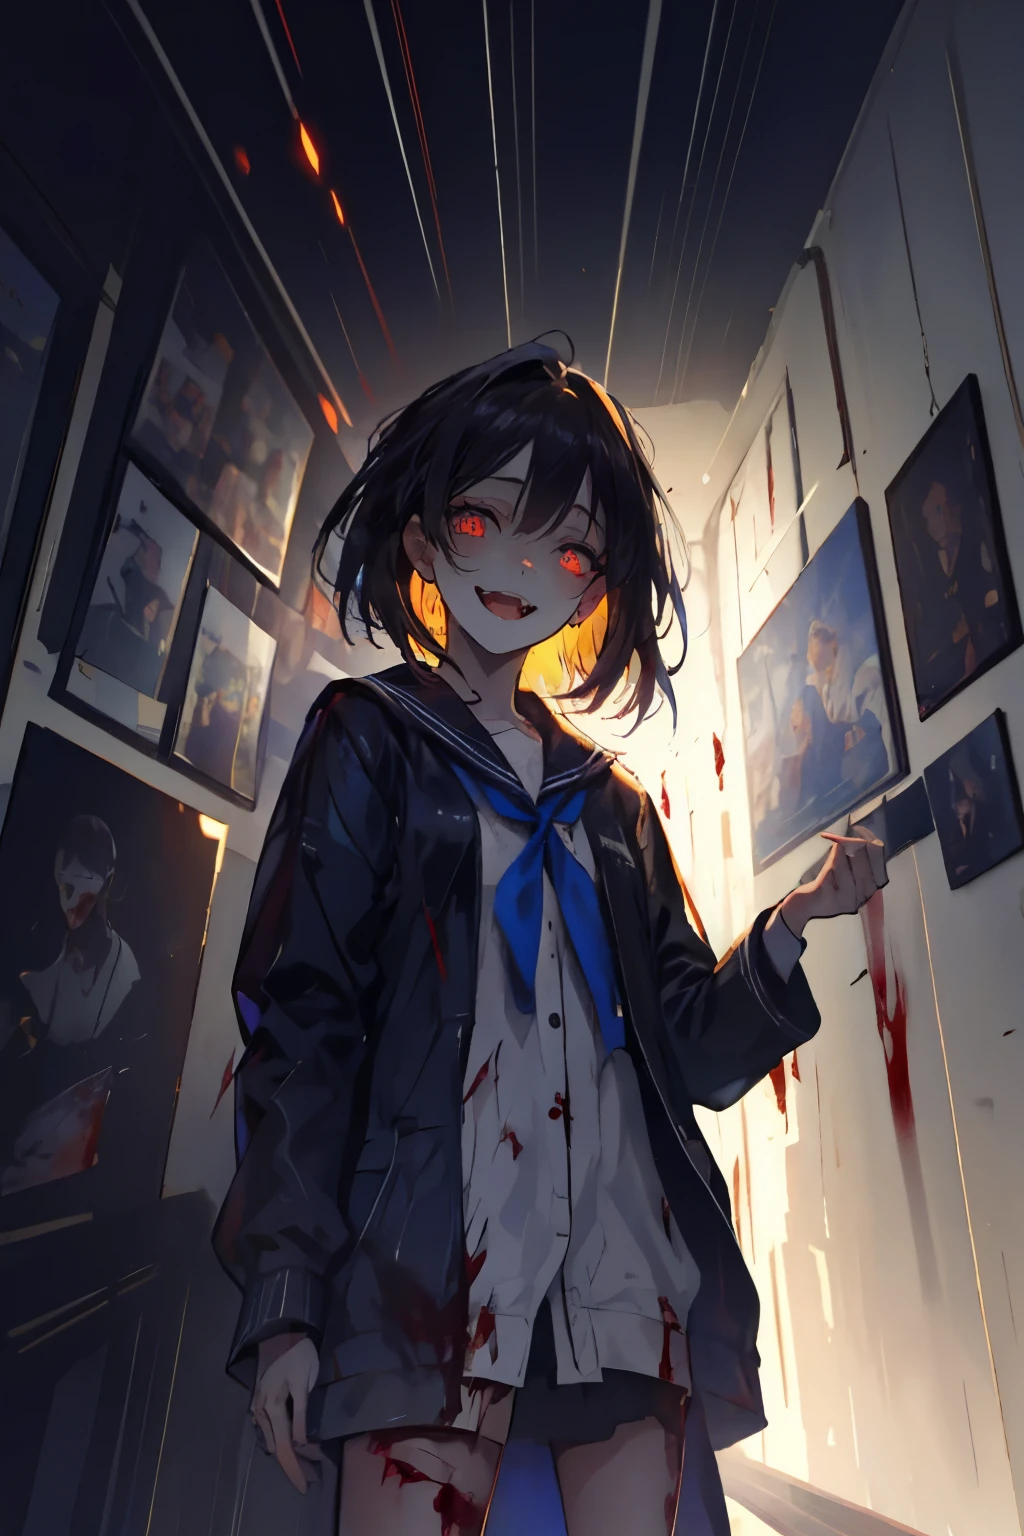 Please generate a close-up, portrait-style anime image of a yandere girl. She has long, disheveled black or dark brown hair, with large, gleaming eyes filled with a crazed light, and her pupils slightly contracted. She wears a classic Japanese high , a white shirt with a sailor skirt that has some blood stains. She has a dangerously alluring figure. She holds a bloodied knife in her hand, with an eerie and maniacal smile on her face, her mouth unnaturally wide and twisted. The background is a dimly lit classroom with blood stains and graffiti on the walls. The floor is littered with broken books and glass shards, creating a sinister and terrifying atmosphere. She should appear intensely obsessed with the viewer, her eyes fixed on them with a look of dangerous devotion and possessiveness. The image should be highly detailed, a masterpiece with excellent lighting and the best possible quality.